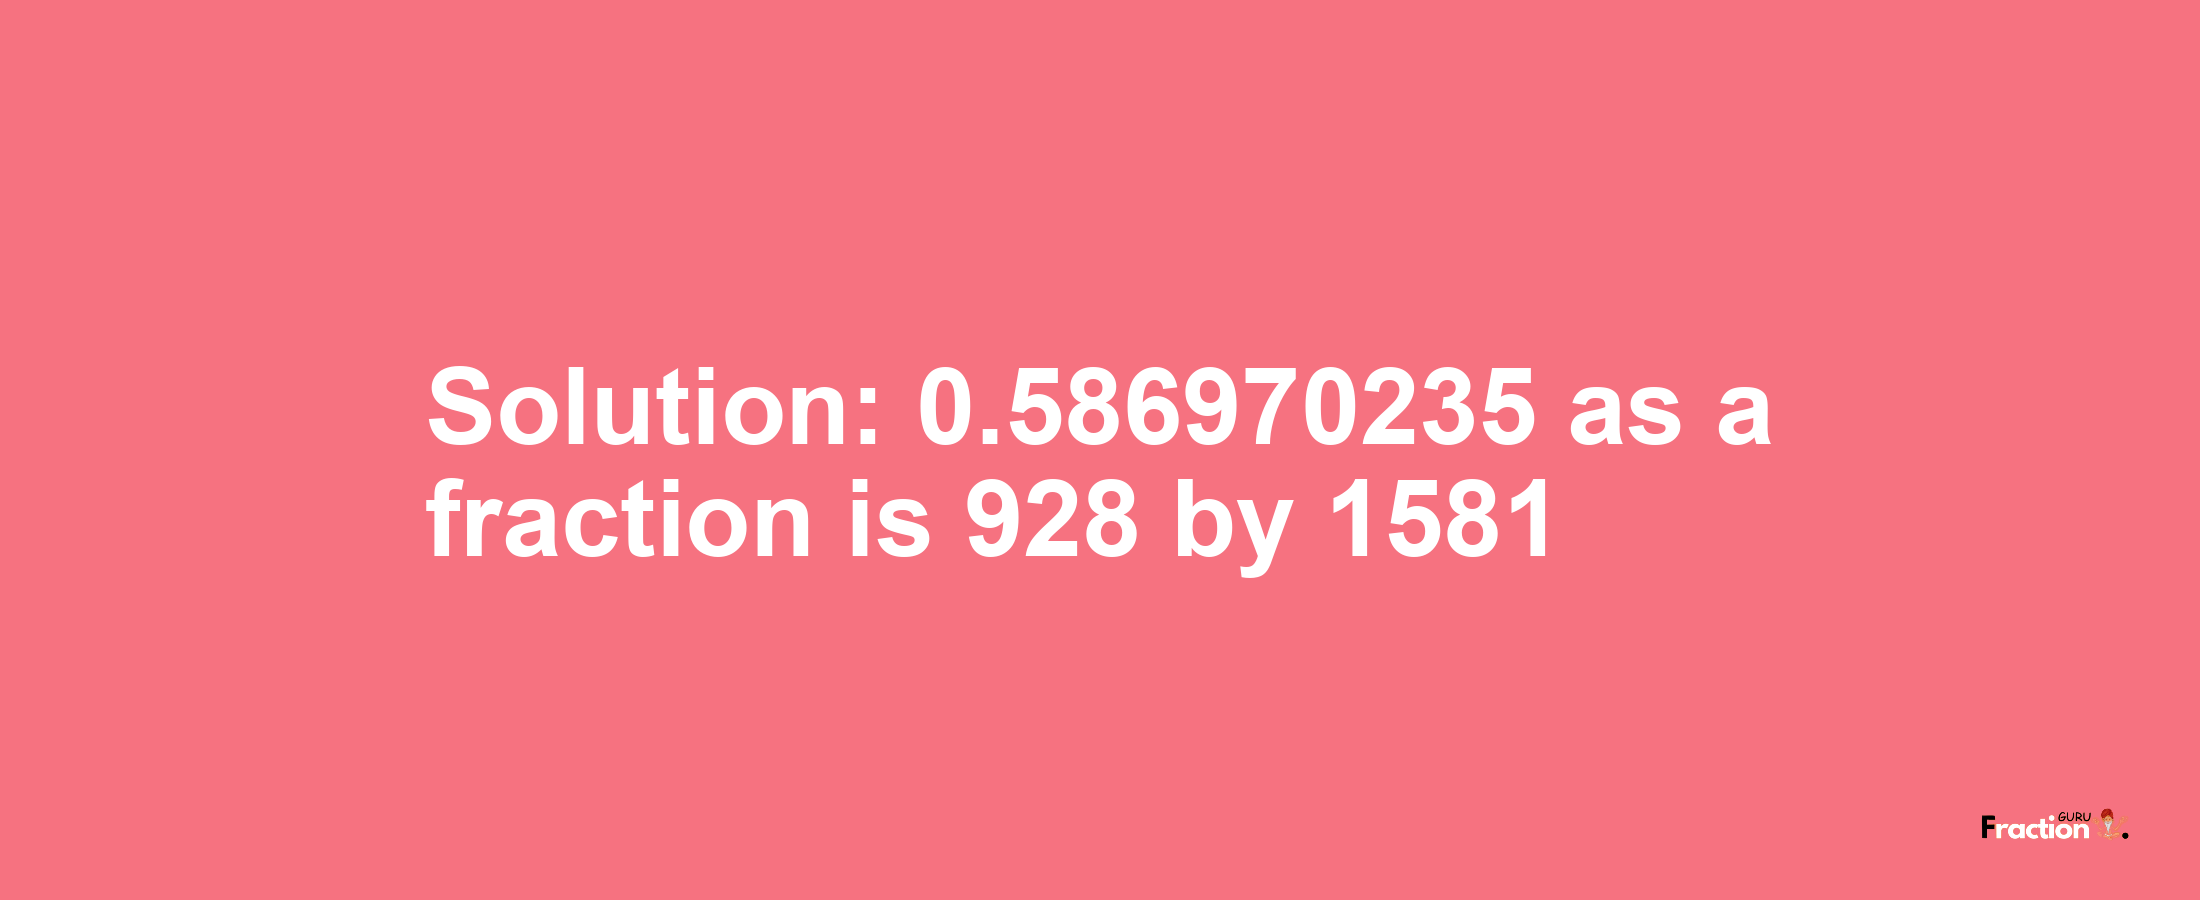 Solution:0.586970235 as a fraction is 928/1581